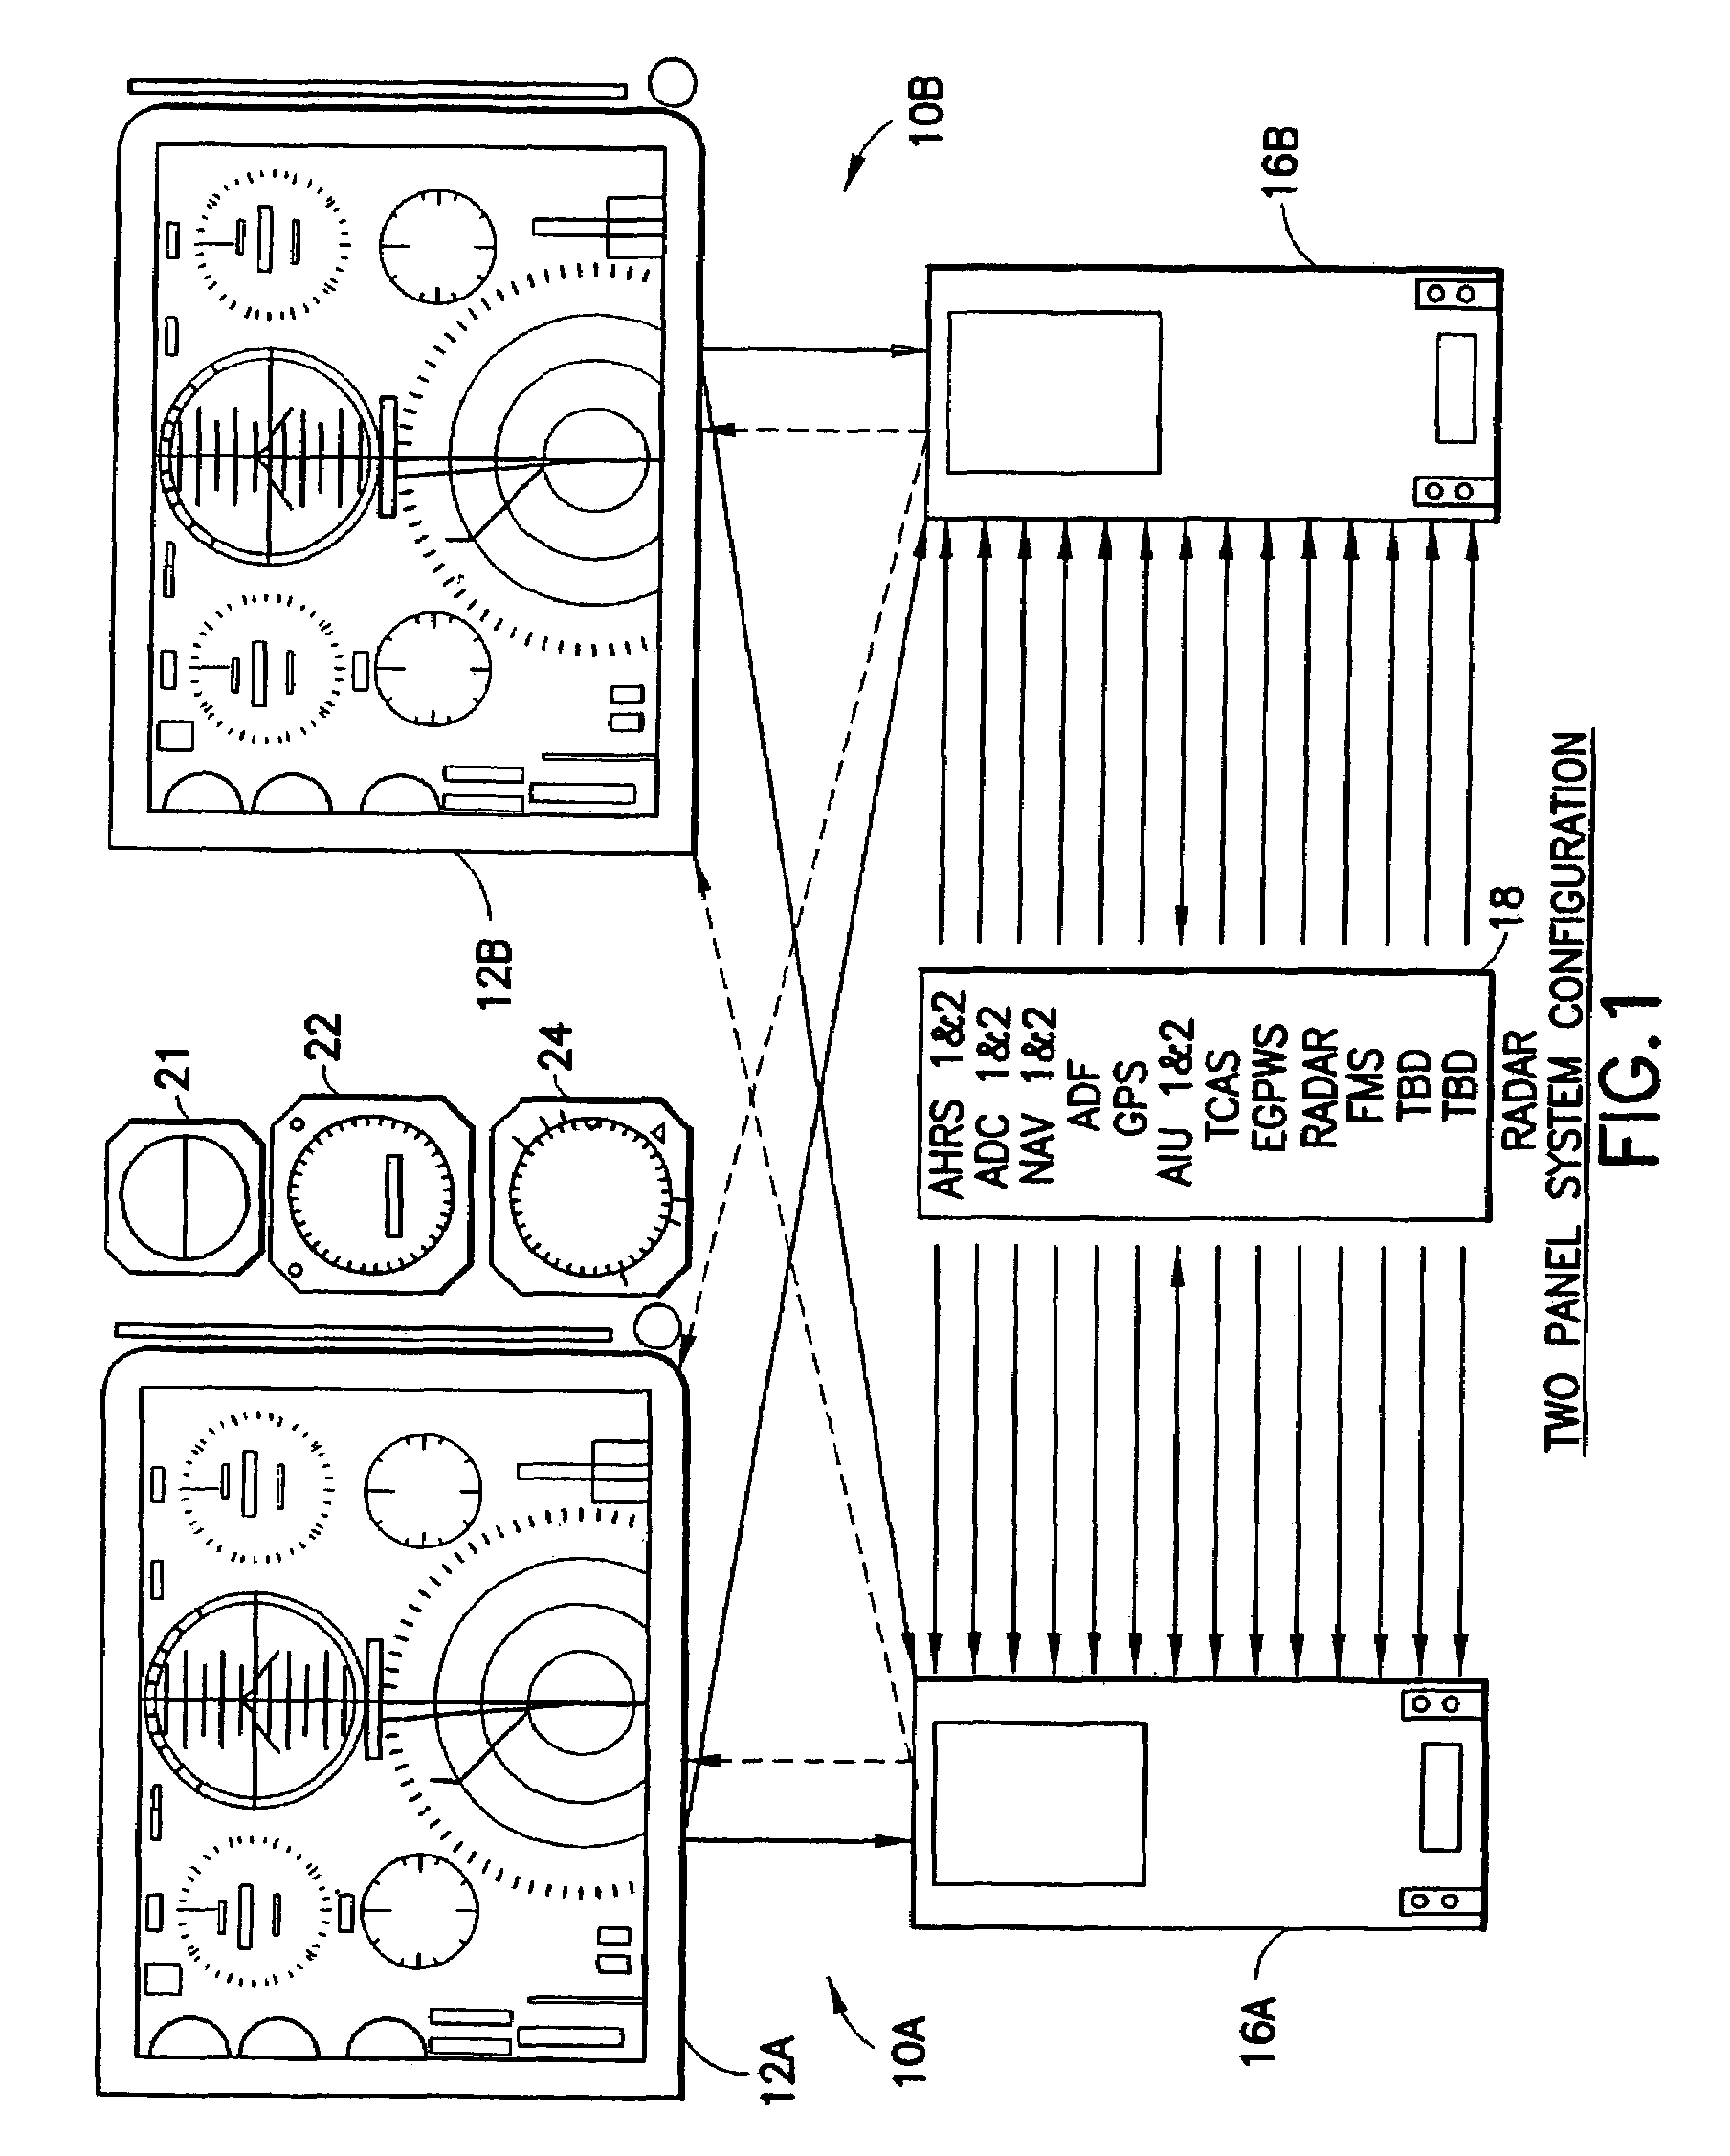 Aircraft flat panel display system with graphical image integrity